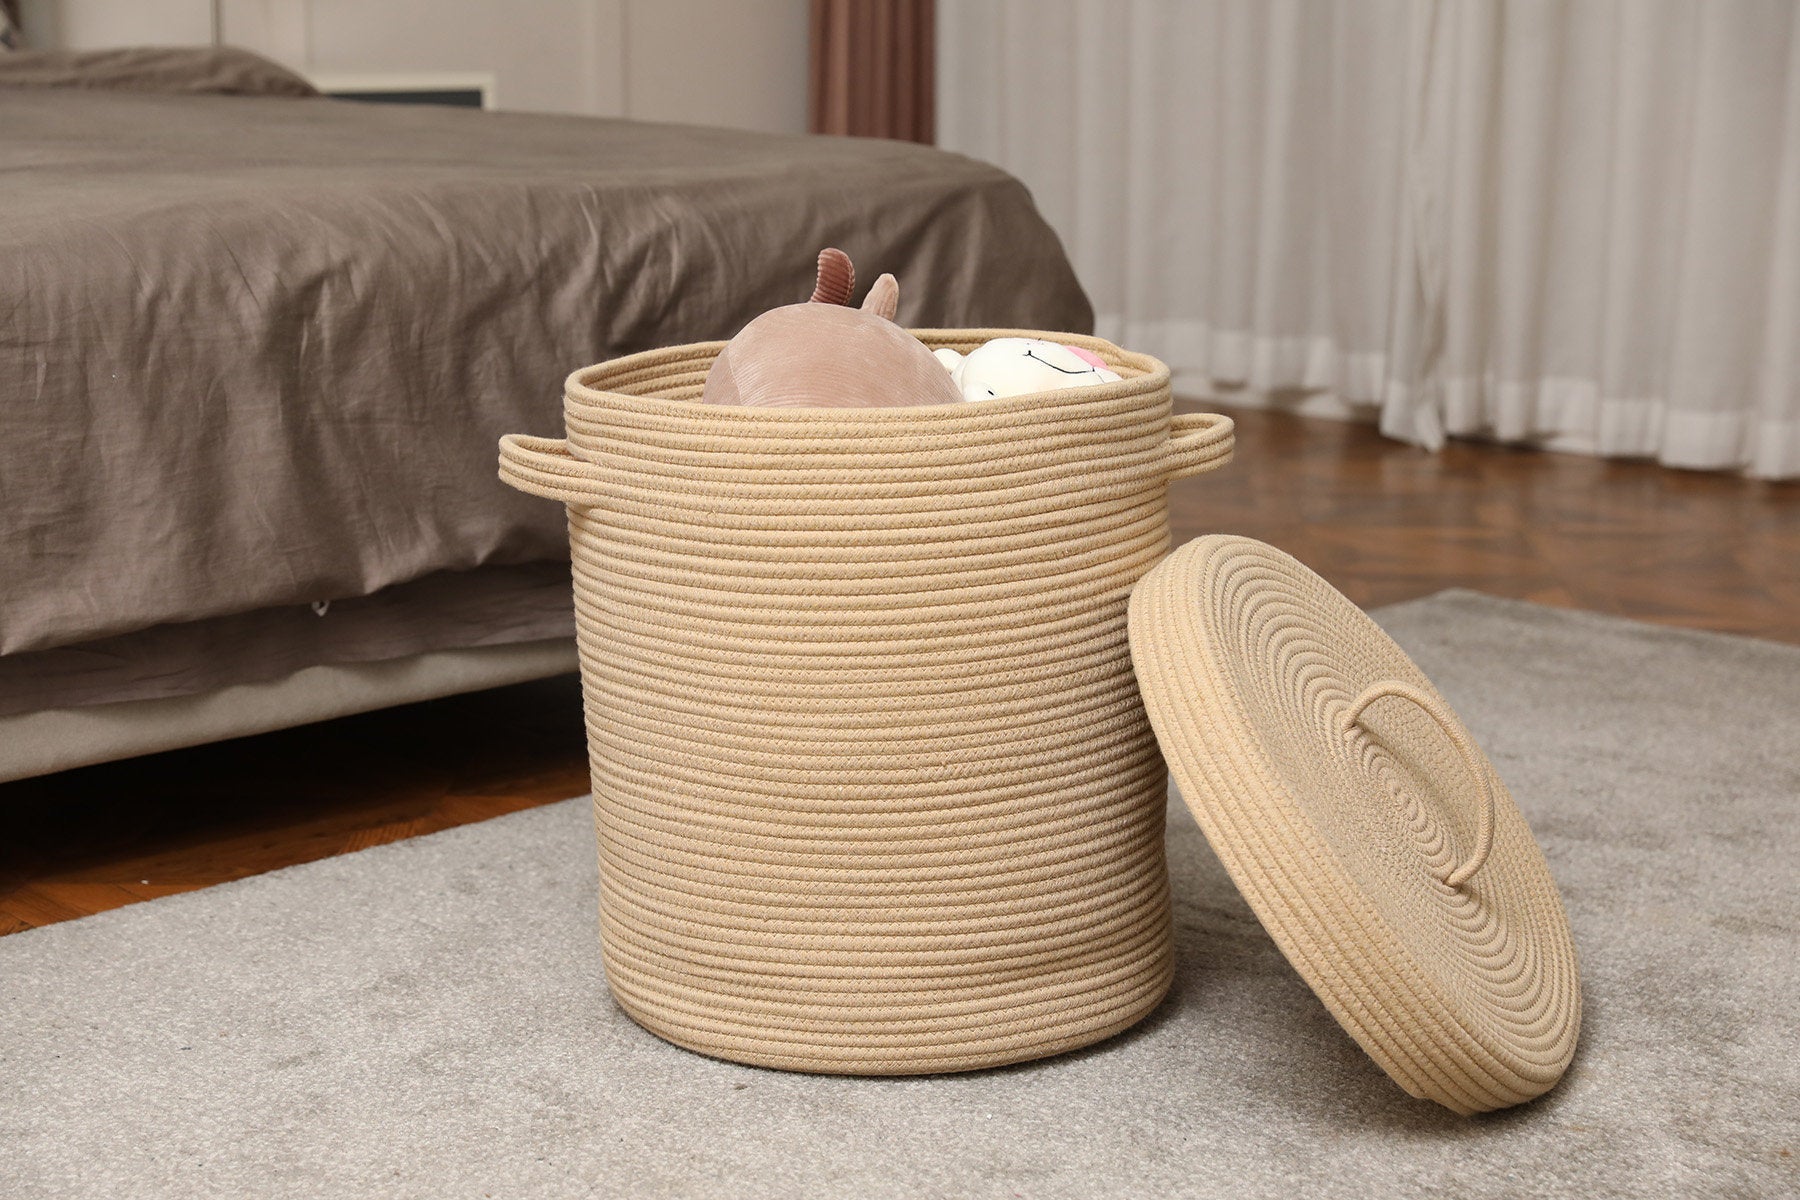 Rattan Laundry Hamper with Lid - Large